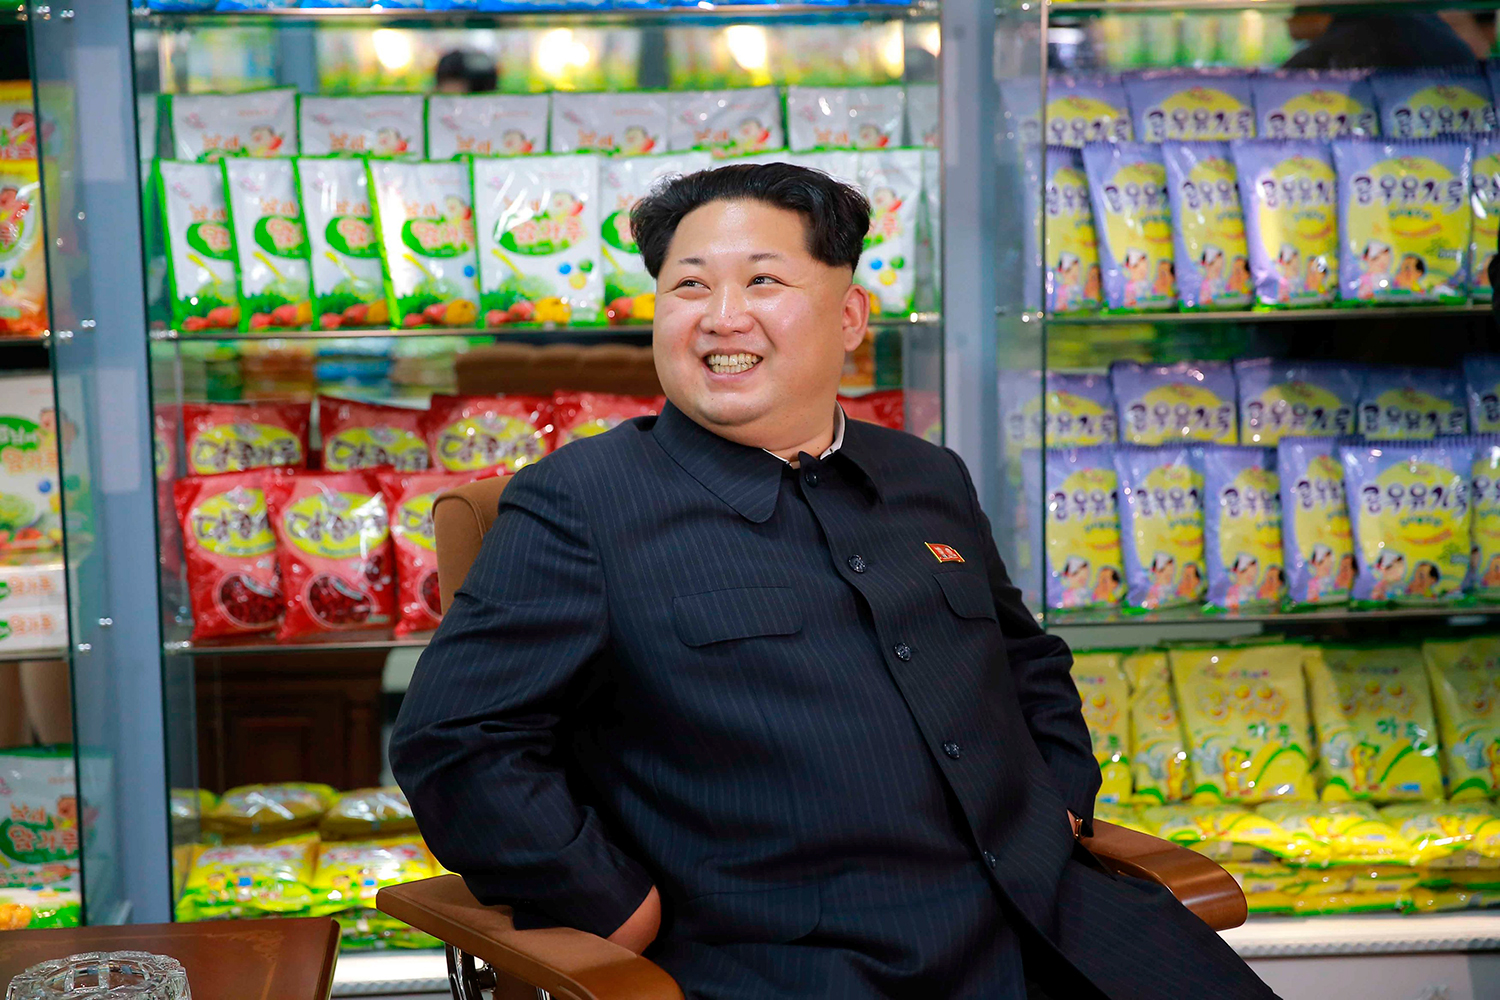 Kim Jong-Un doesn’t go anywhere without his portable bathroom